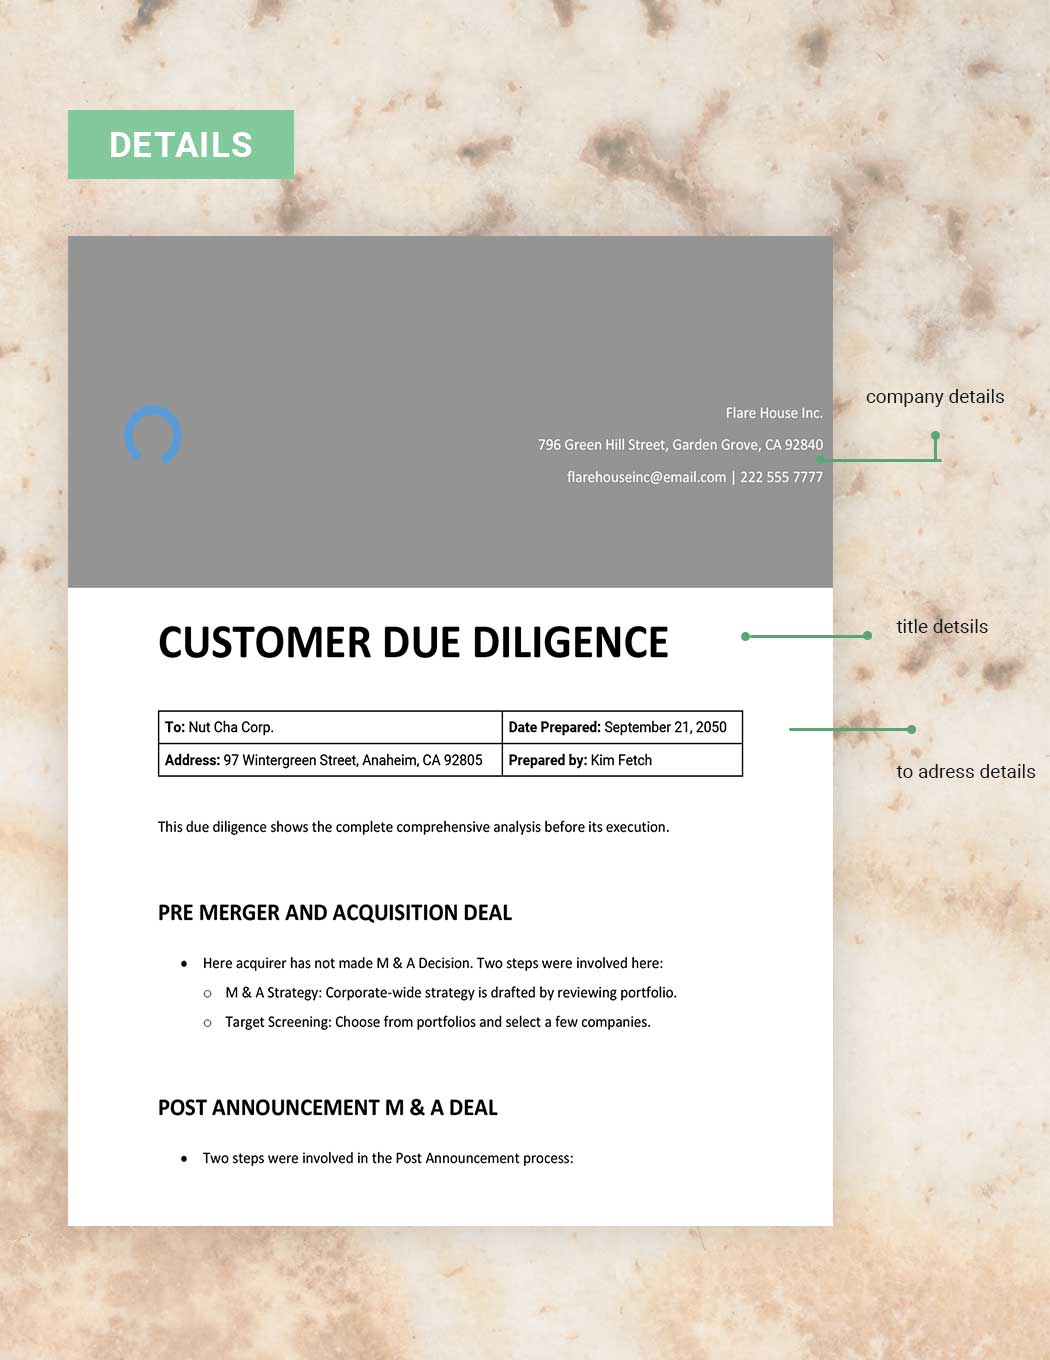 Customer Due Diligence 